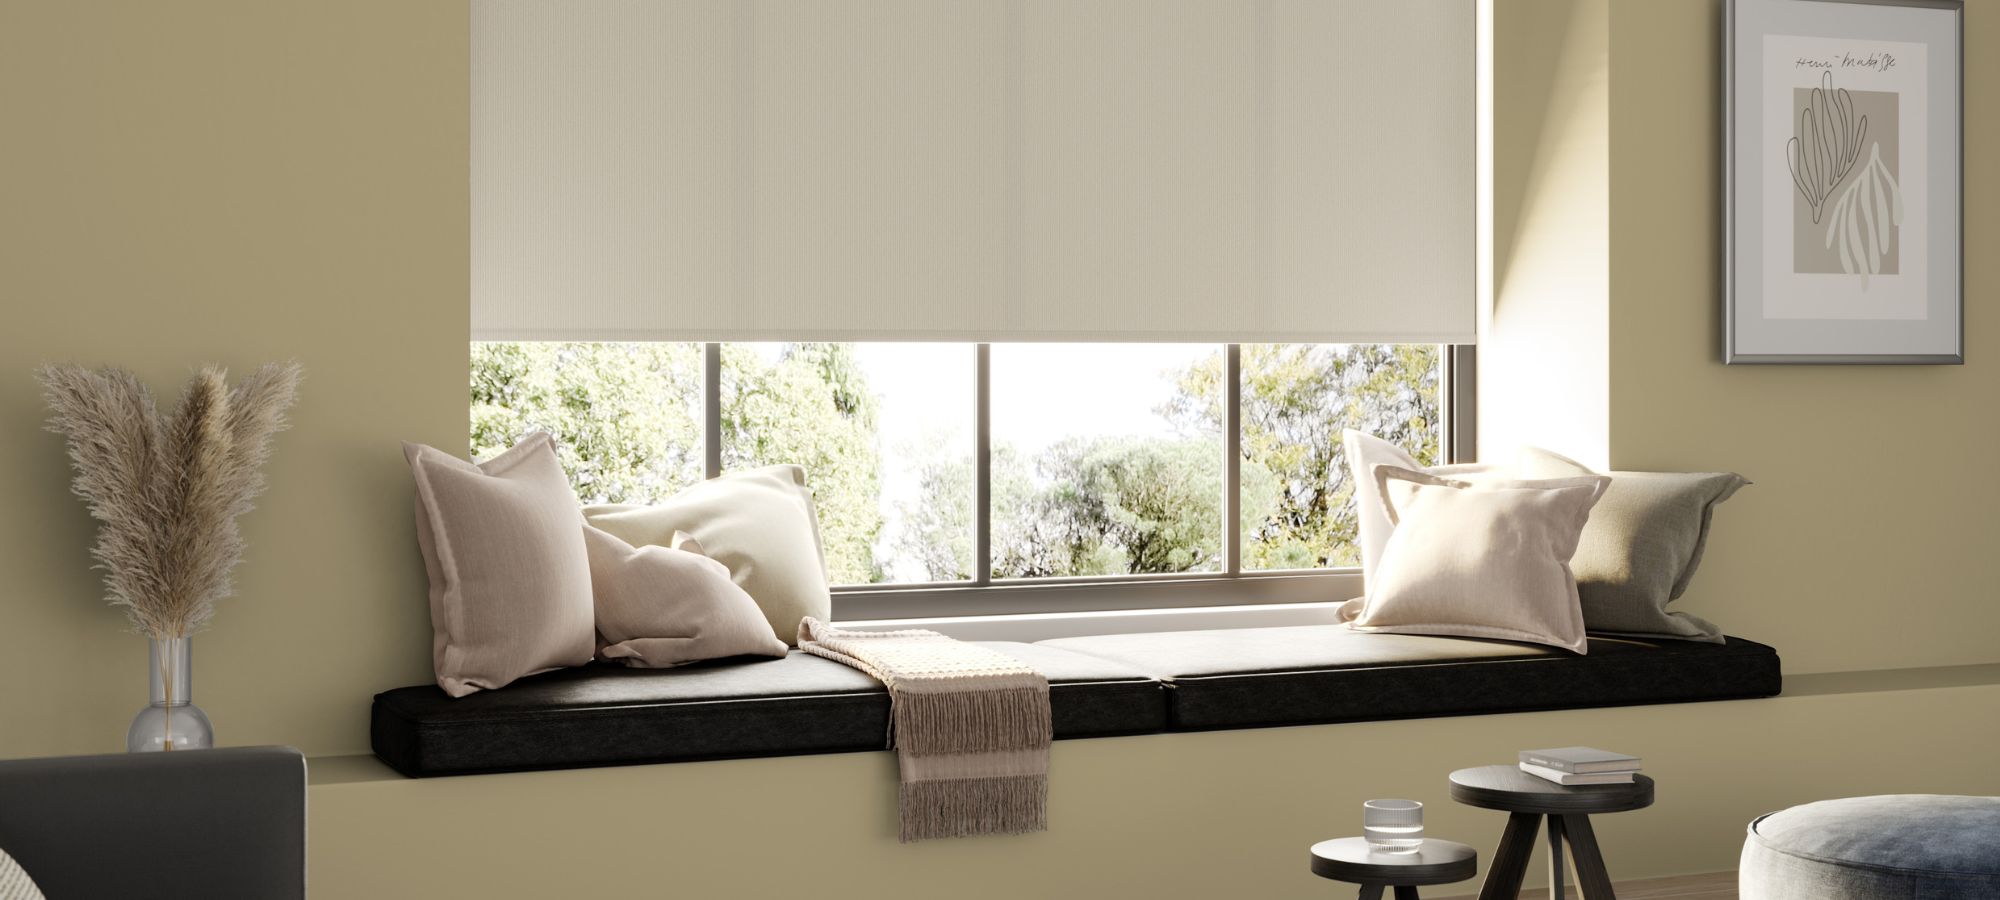 Which Blinds Do Not Break? A Guide & Ranked List of the Most Unbreakable -  English Blinds